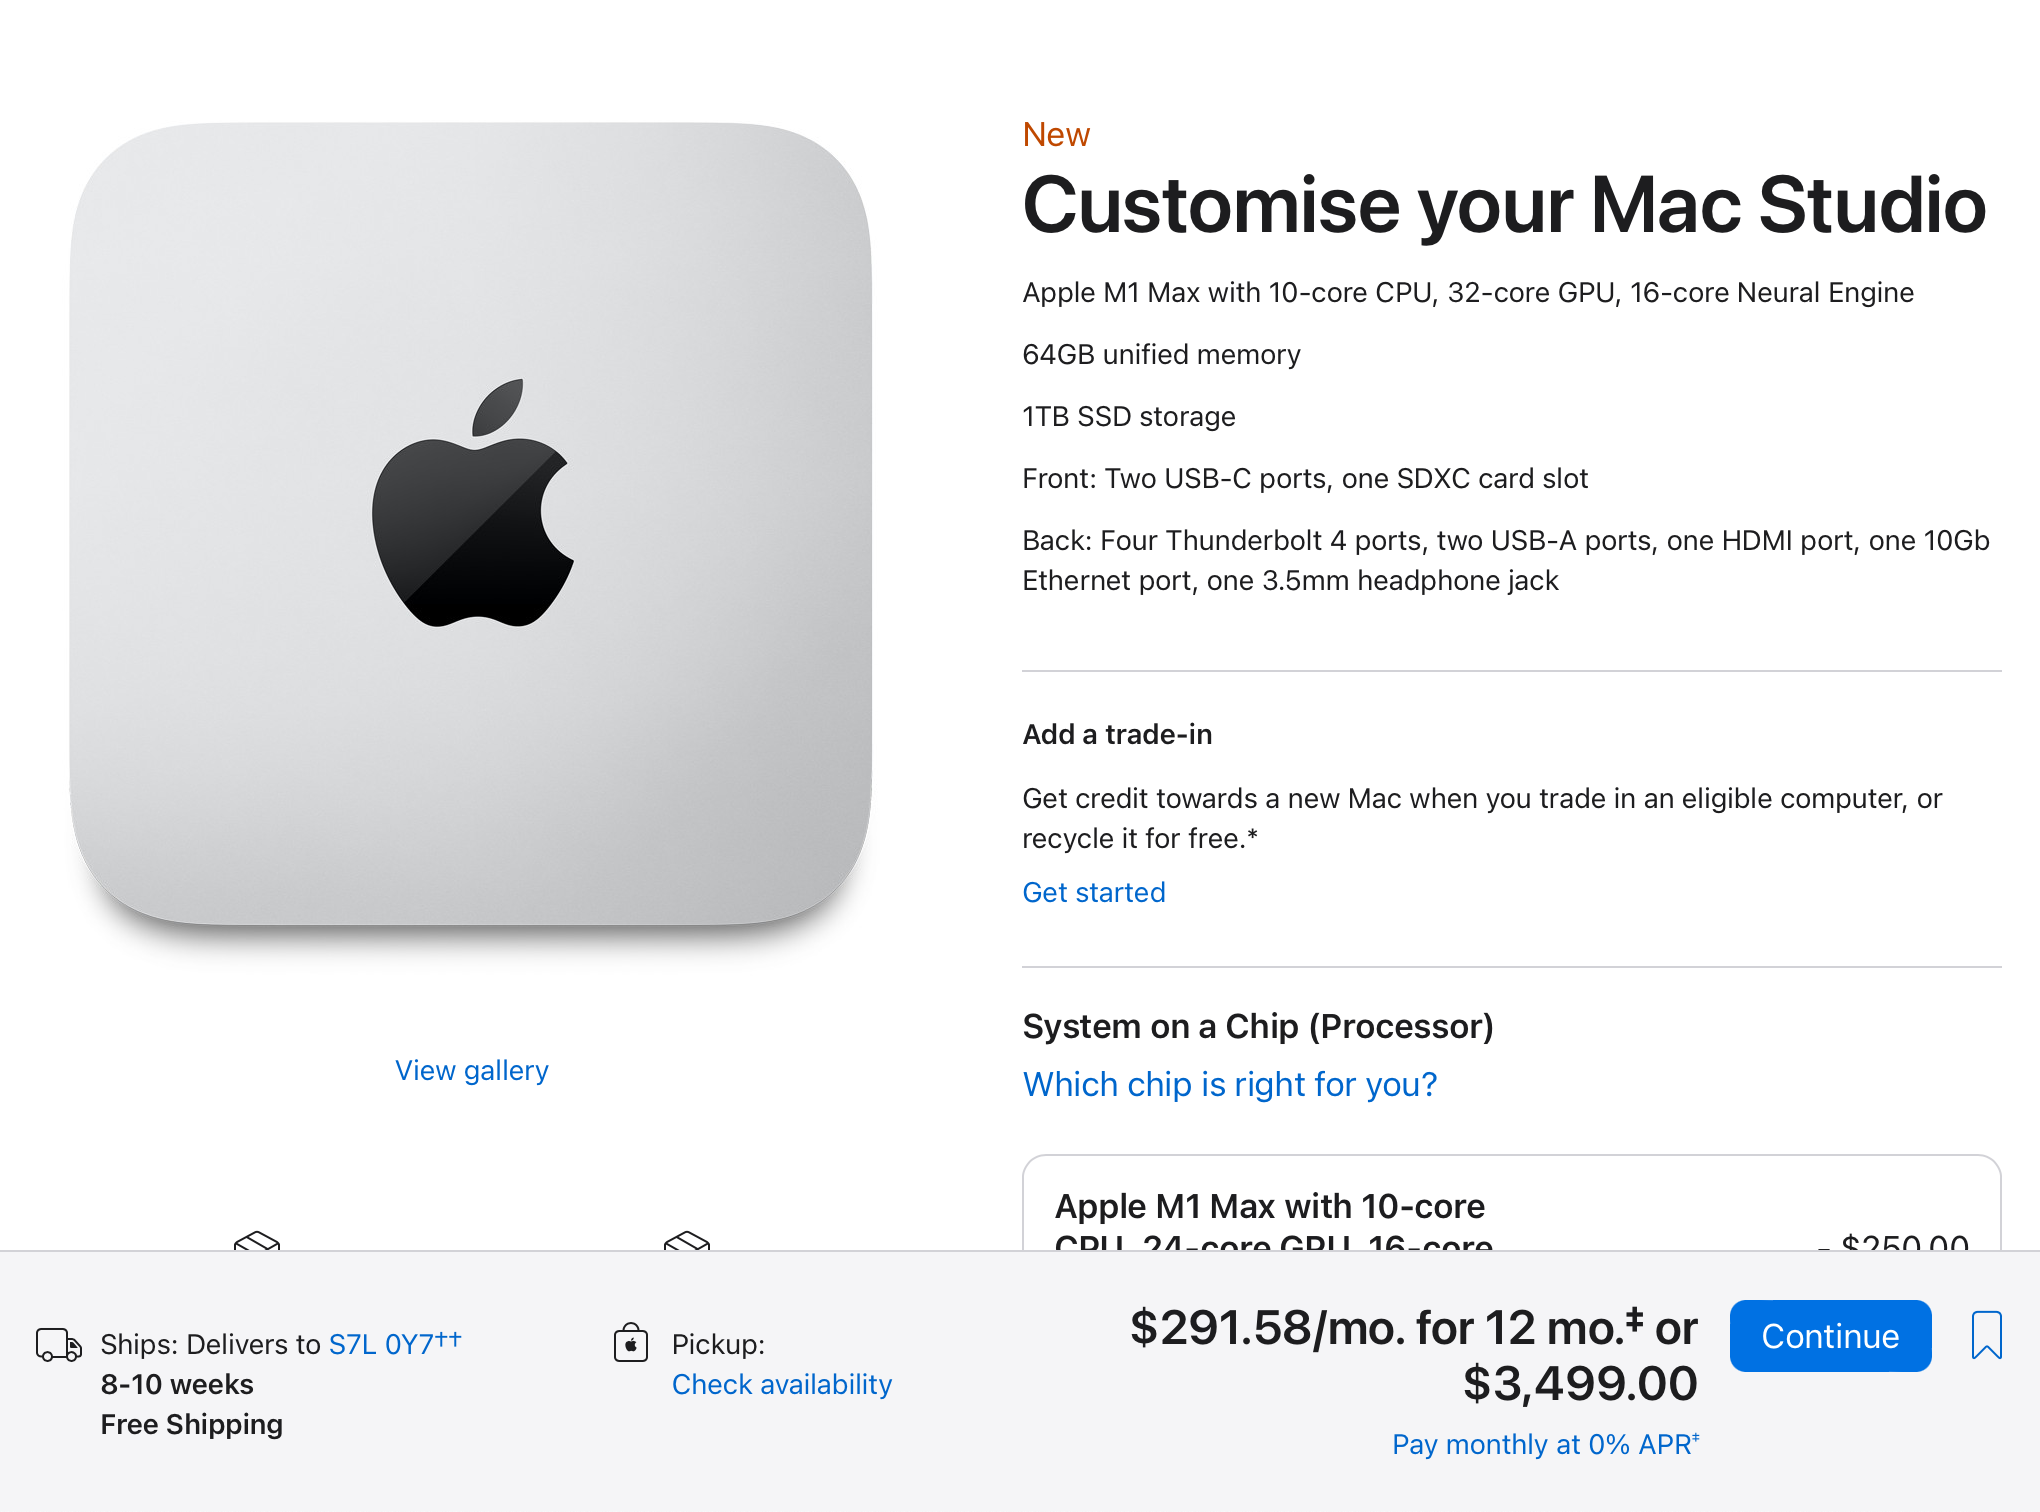 A Apple store config page for the Mac Studio with an M1 Max, 10 core CPU, 32 core GPU, 64GB RAM, 1TB SSD for $3,499CAD + tax.